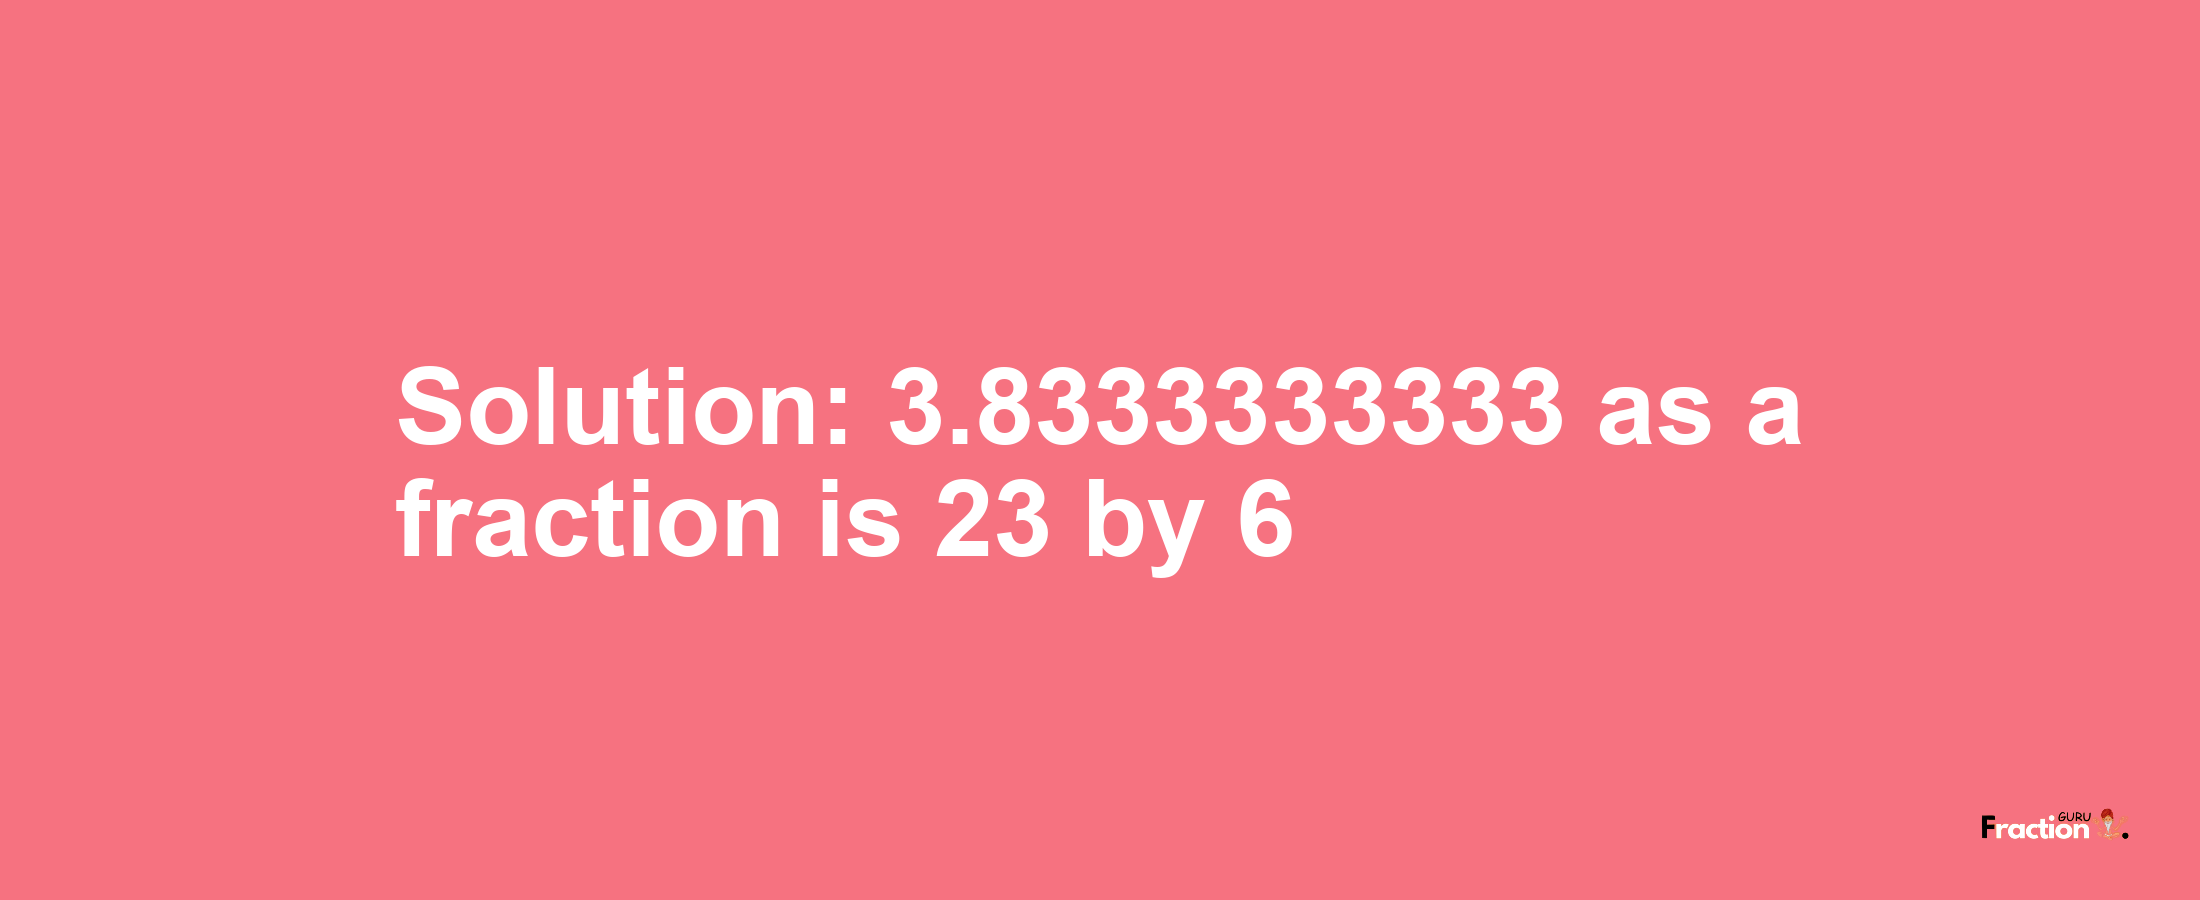 Solution:3.8333333333 as a fraction is 23/6